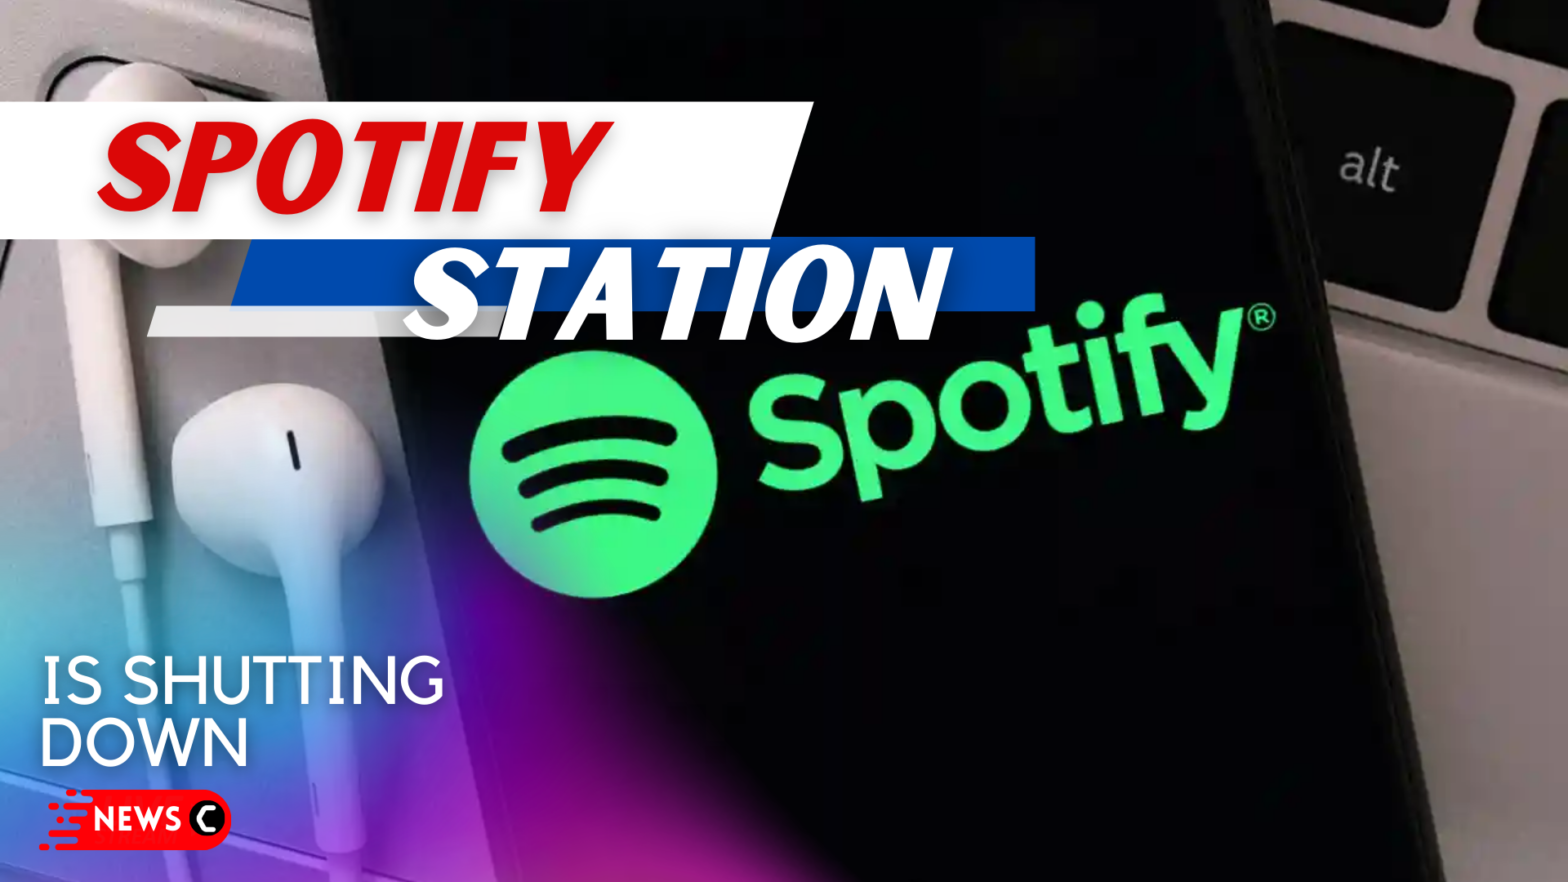 spotify station is shutting down